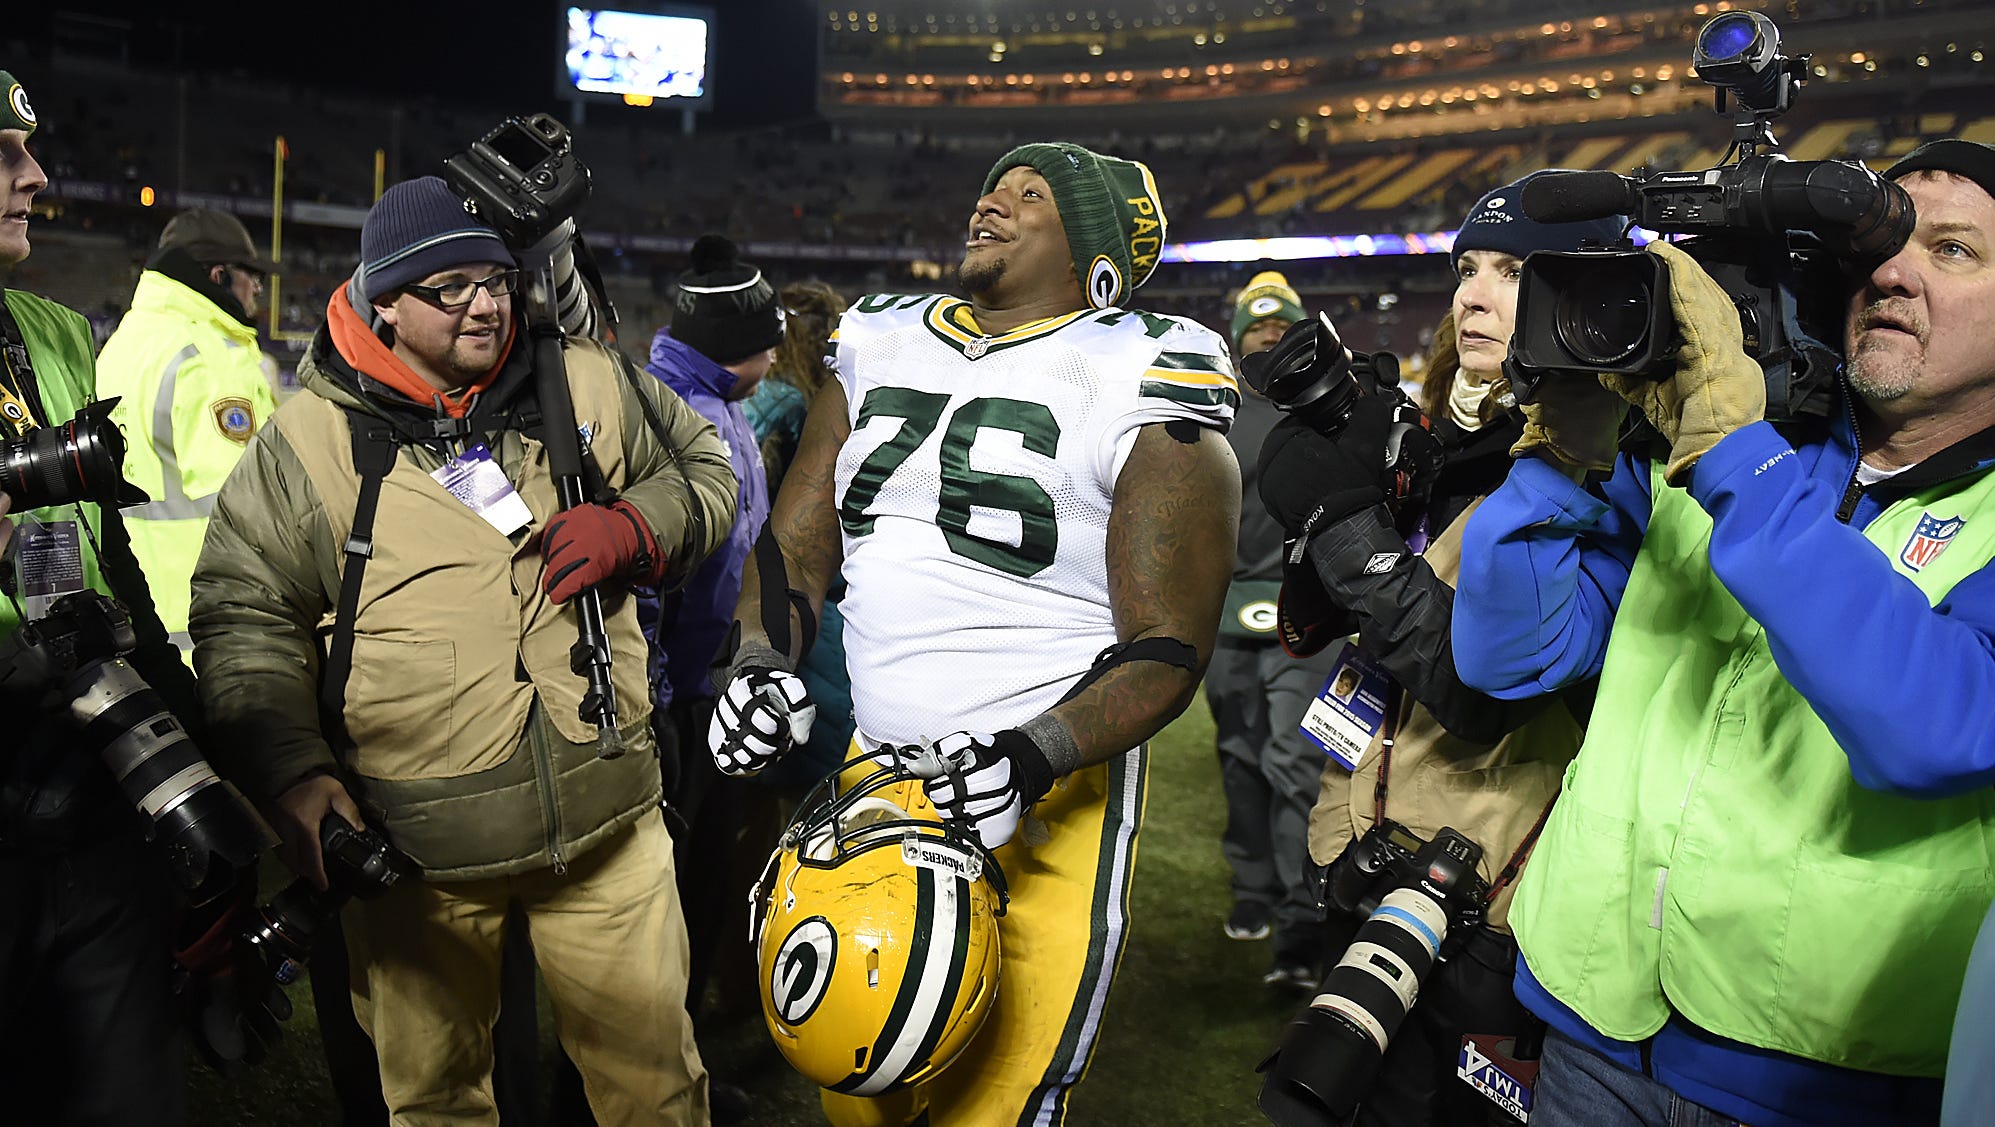 Green Bay Packers defensive tackle Mike Daniels (76) acknowledges the crowd as he walks off the field after a Nov. 22, 2015, game against the Minnesota Vikings at TCF Bank Stadium in Minneapolis.